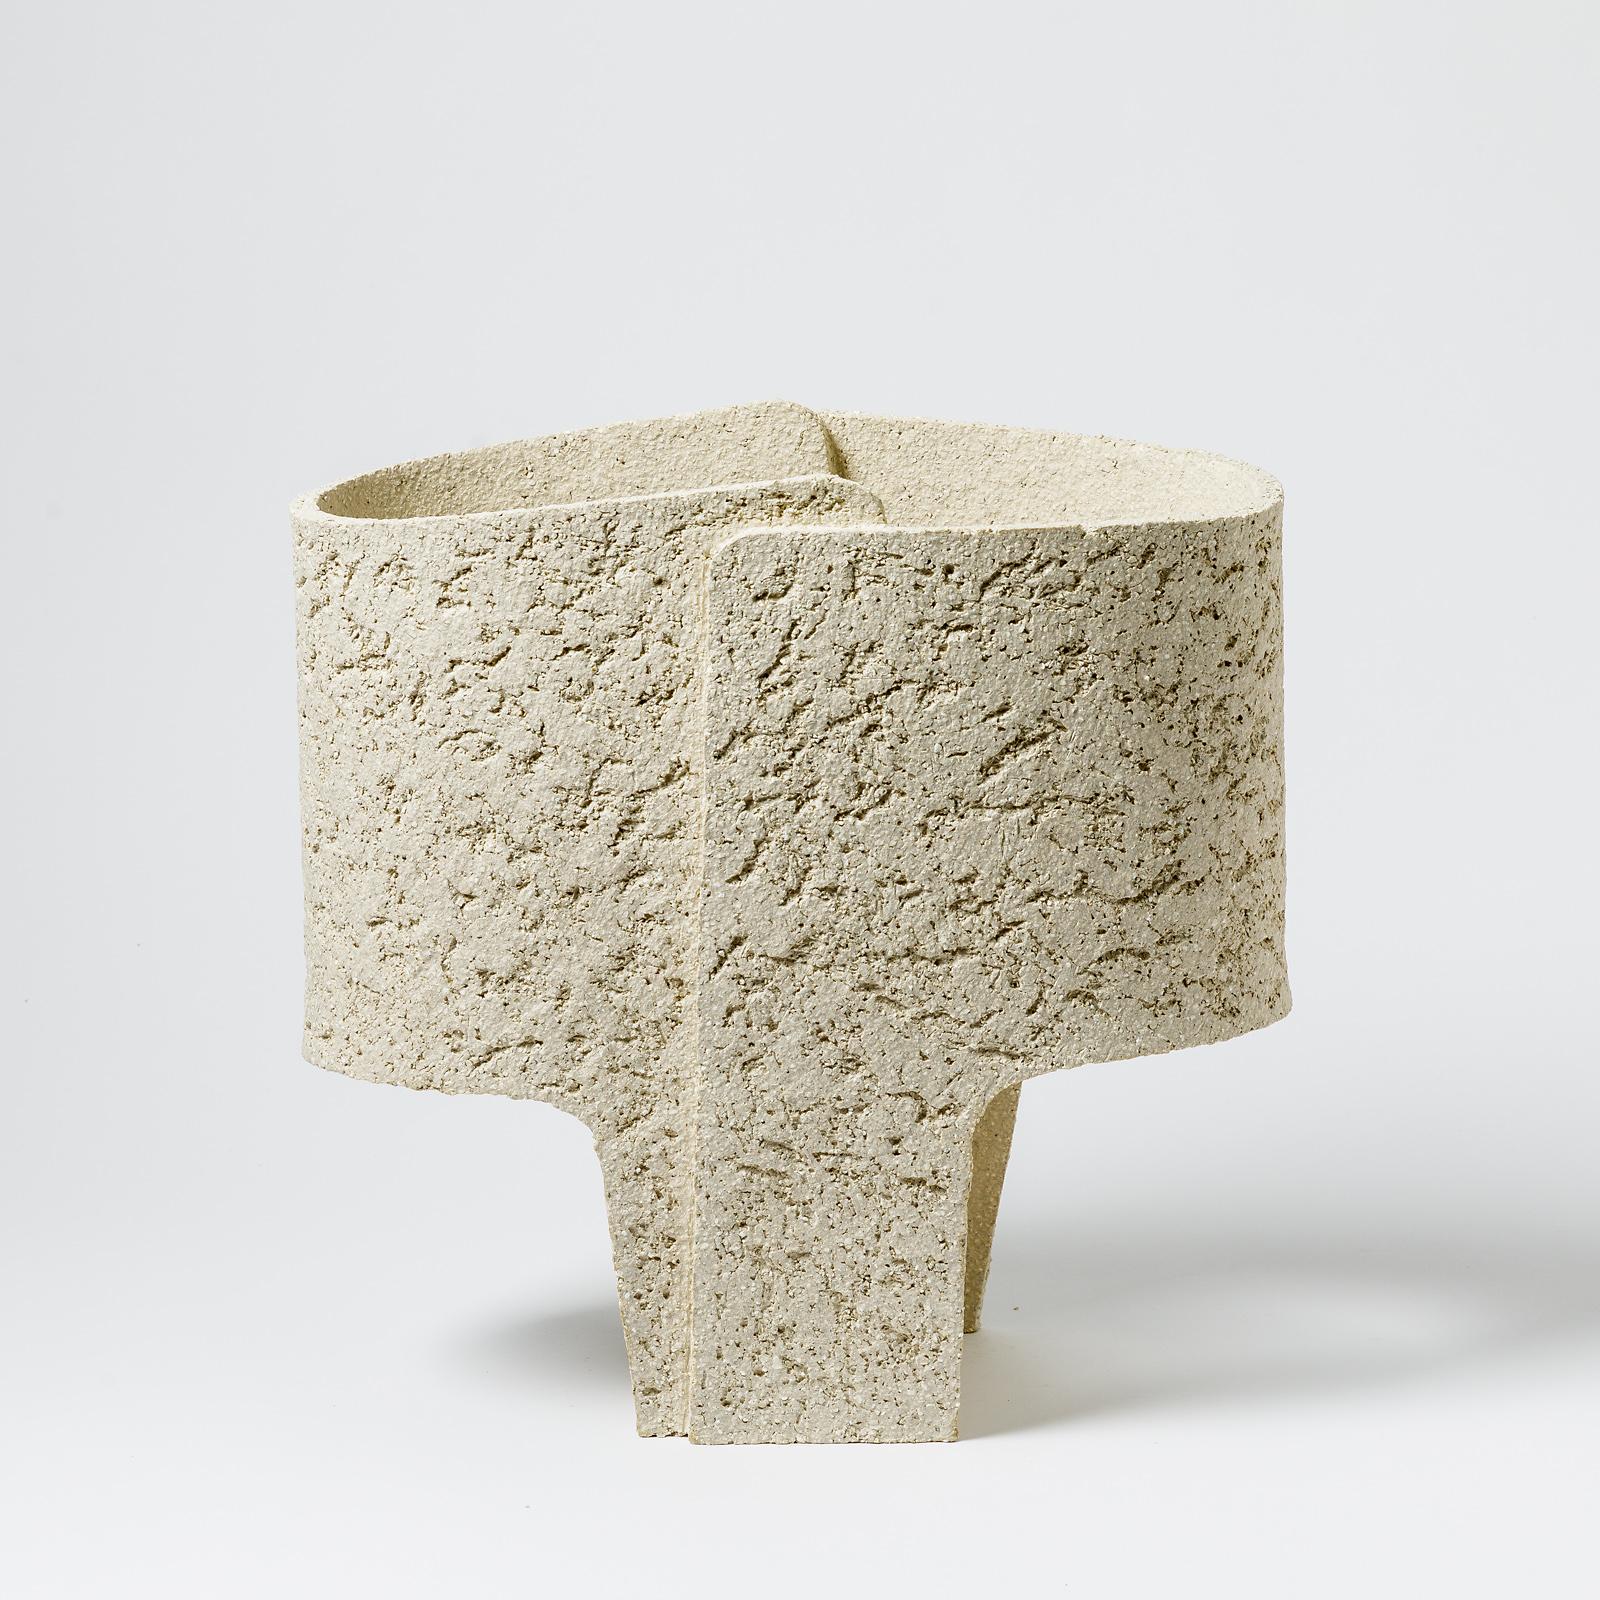 A ceramic table lamp by Denis Castaing.
Perfect original conditions.
Sold with a new European electrical system.
2022.